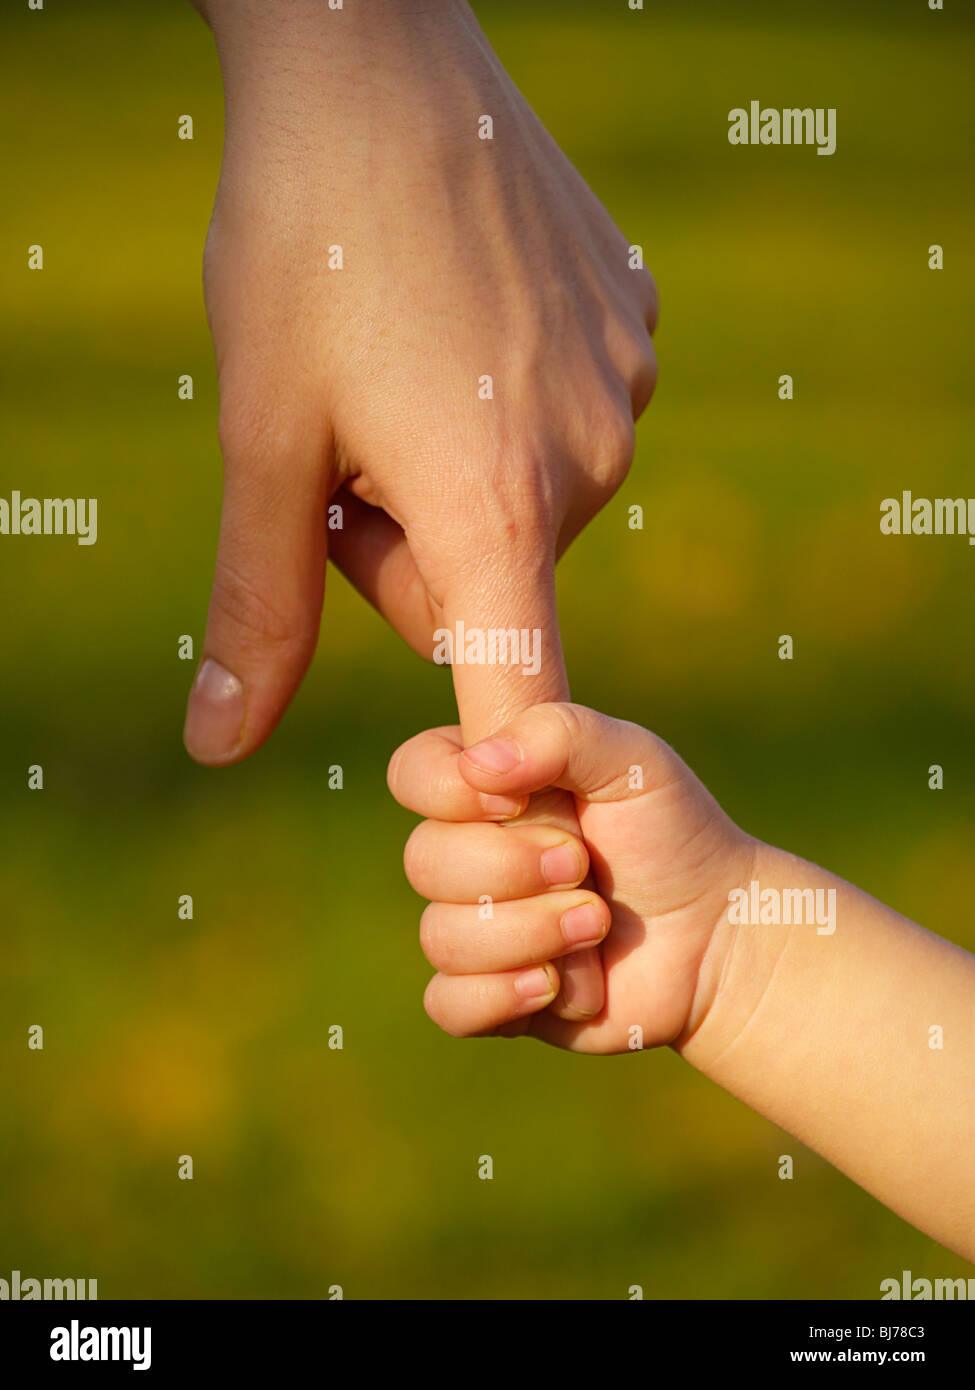 Baby's hand holding un gros doigt Banque D'Images